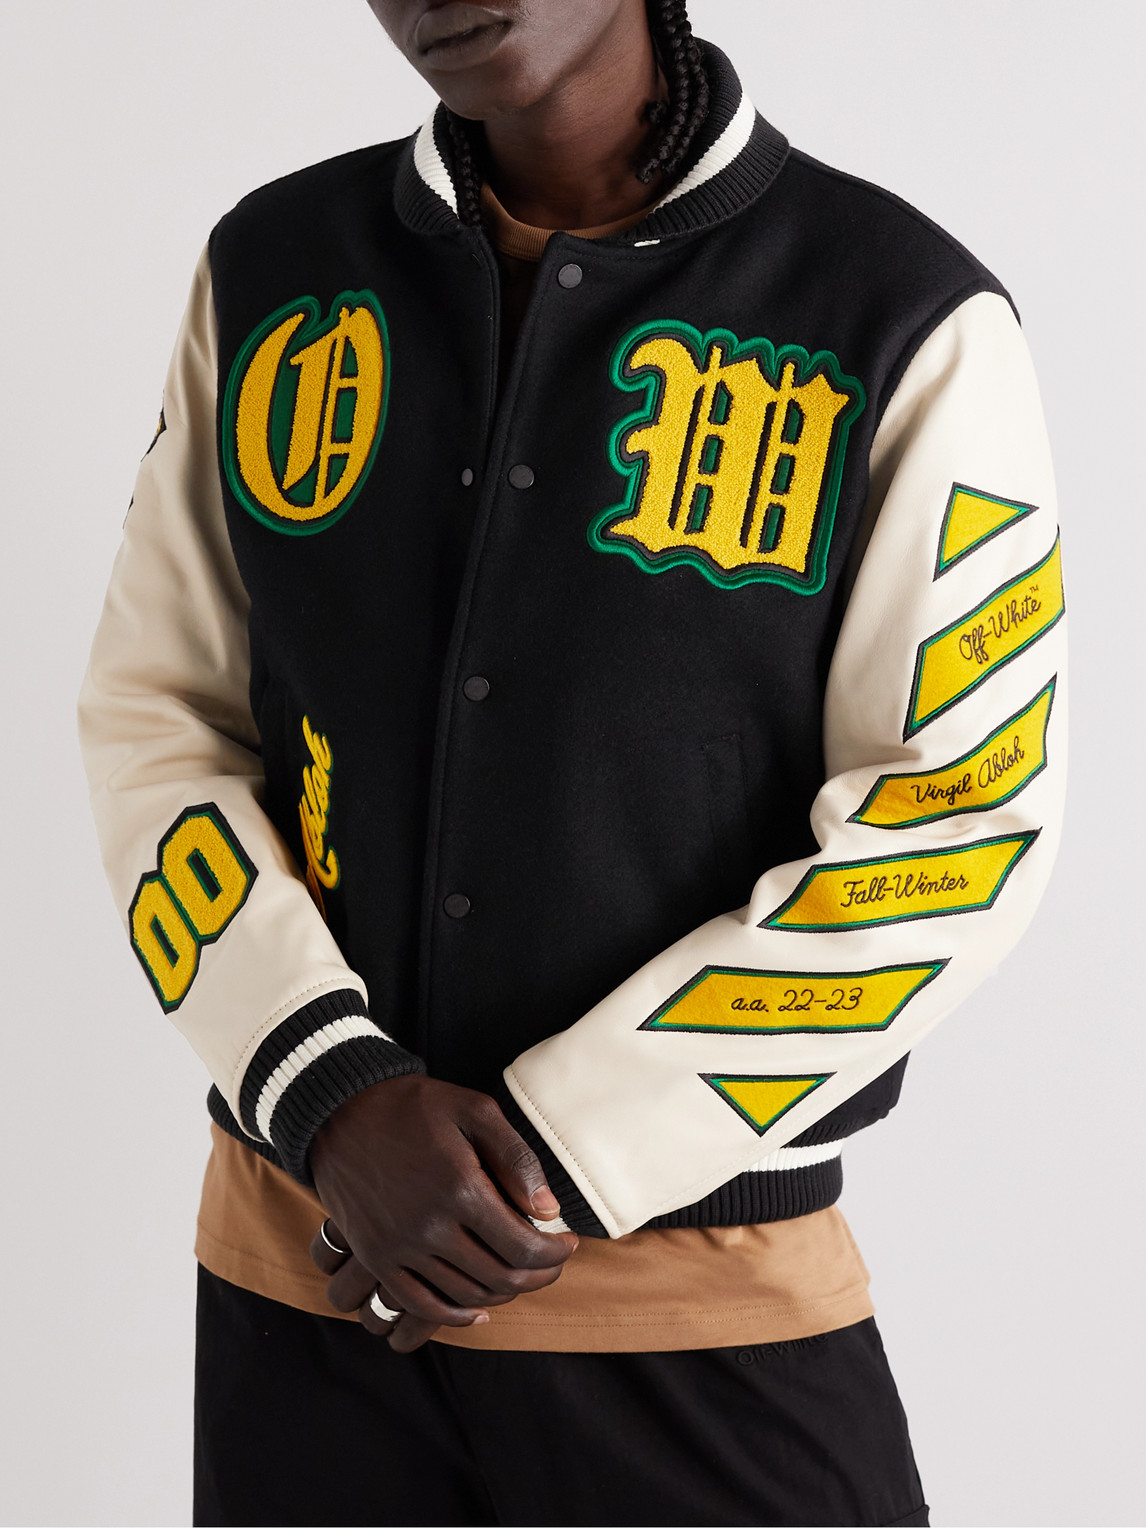 Women's Off-White Virgil Abloh Varsity Jacket with Yellow Striped